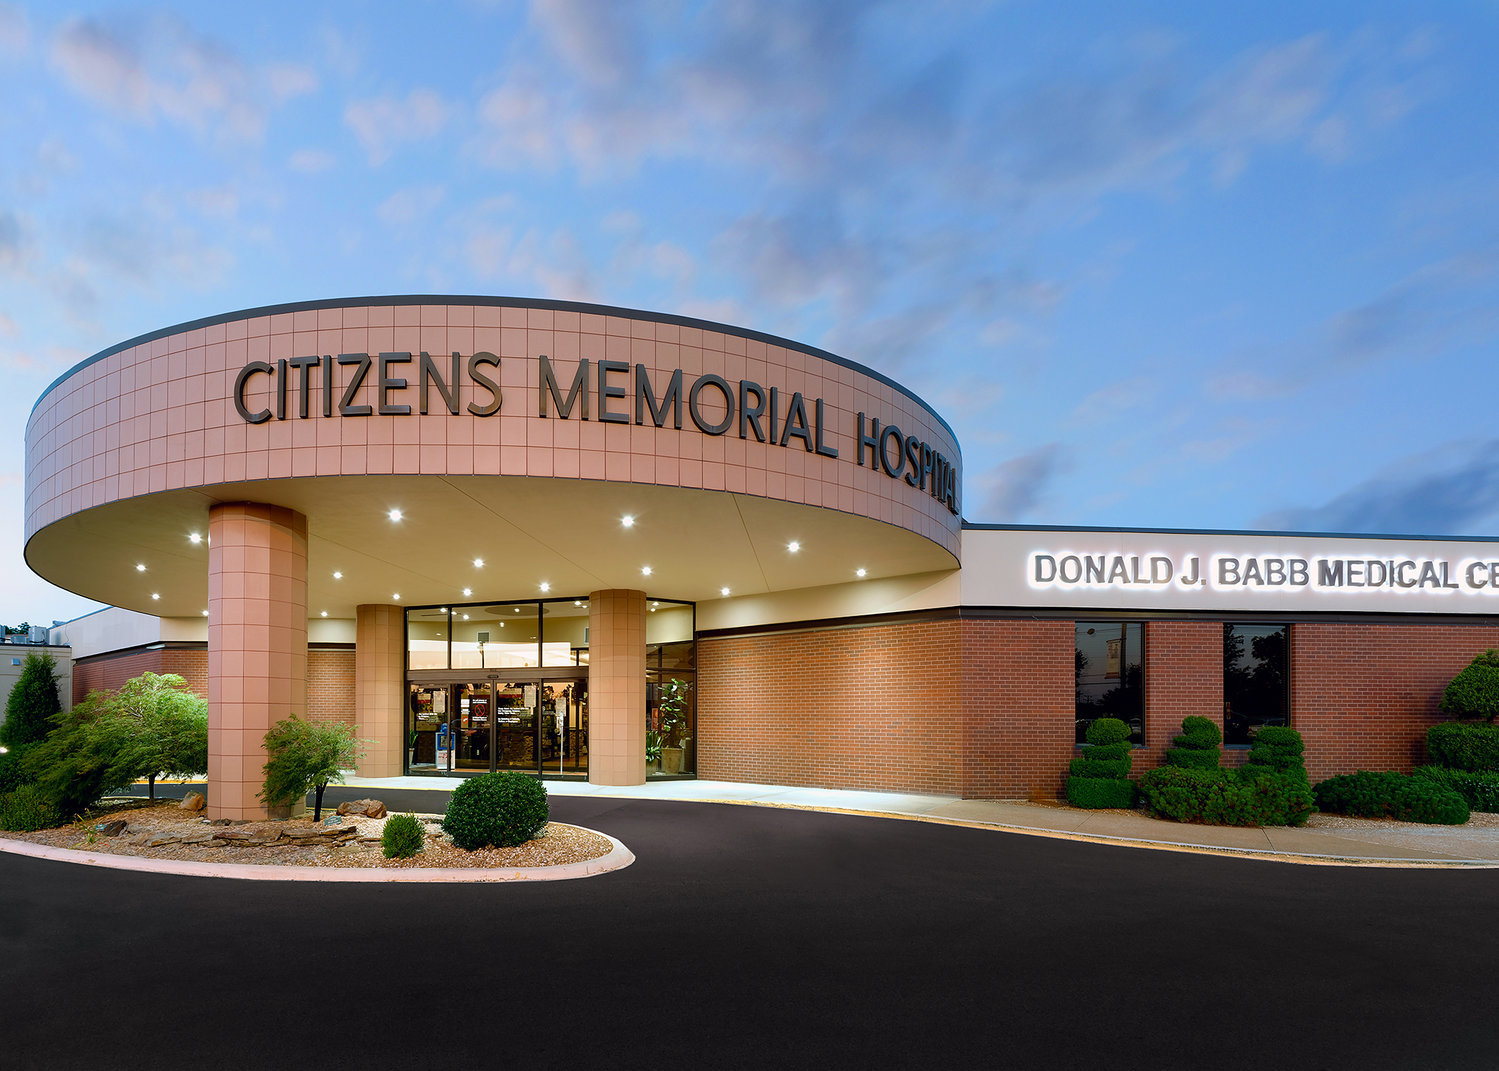 Citizens Memorial Hospital has had only two CEOs in its history.